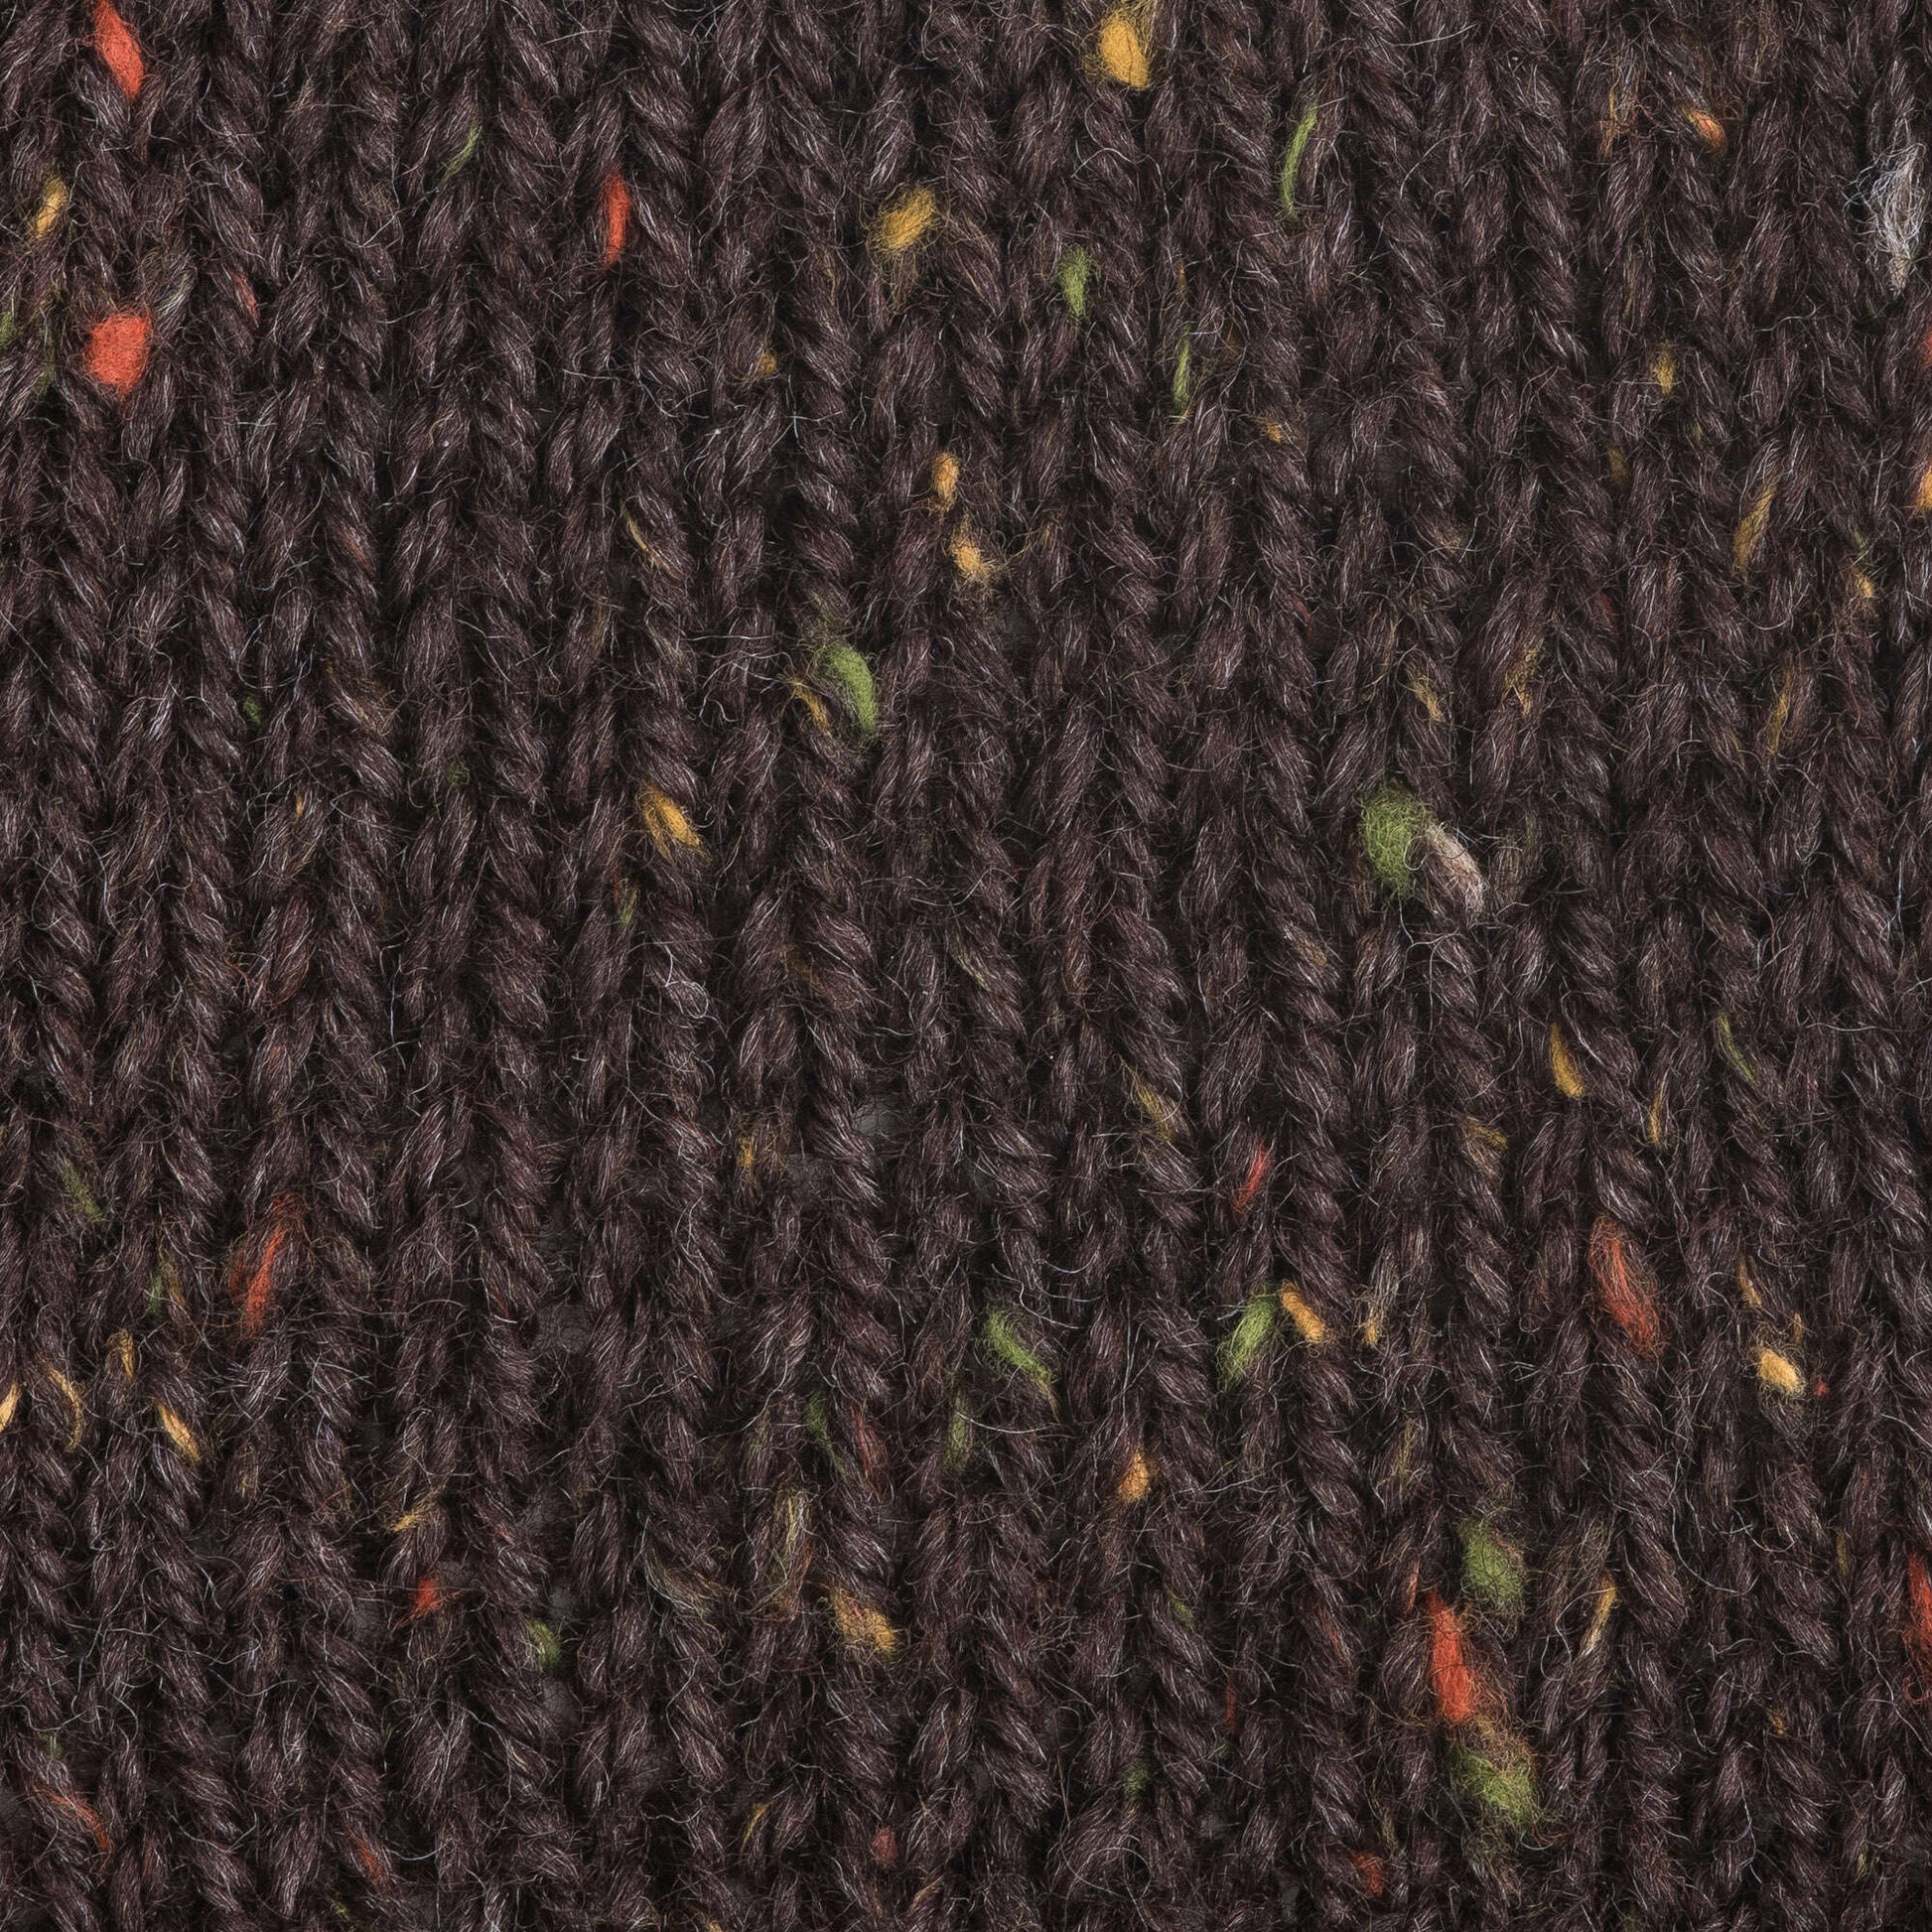 Patons Classic Wool Worsted Yarn - Discontinued shades